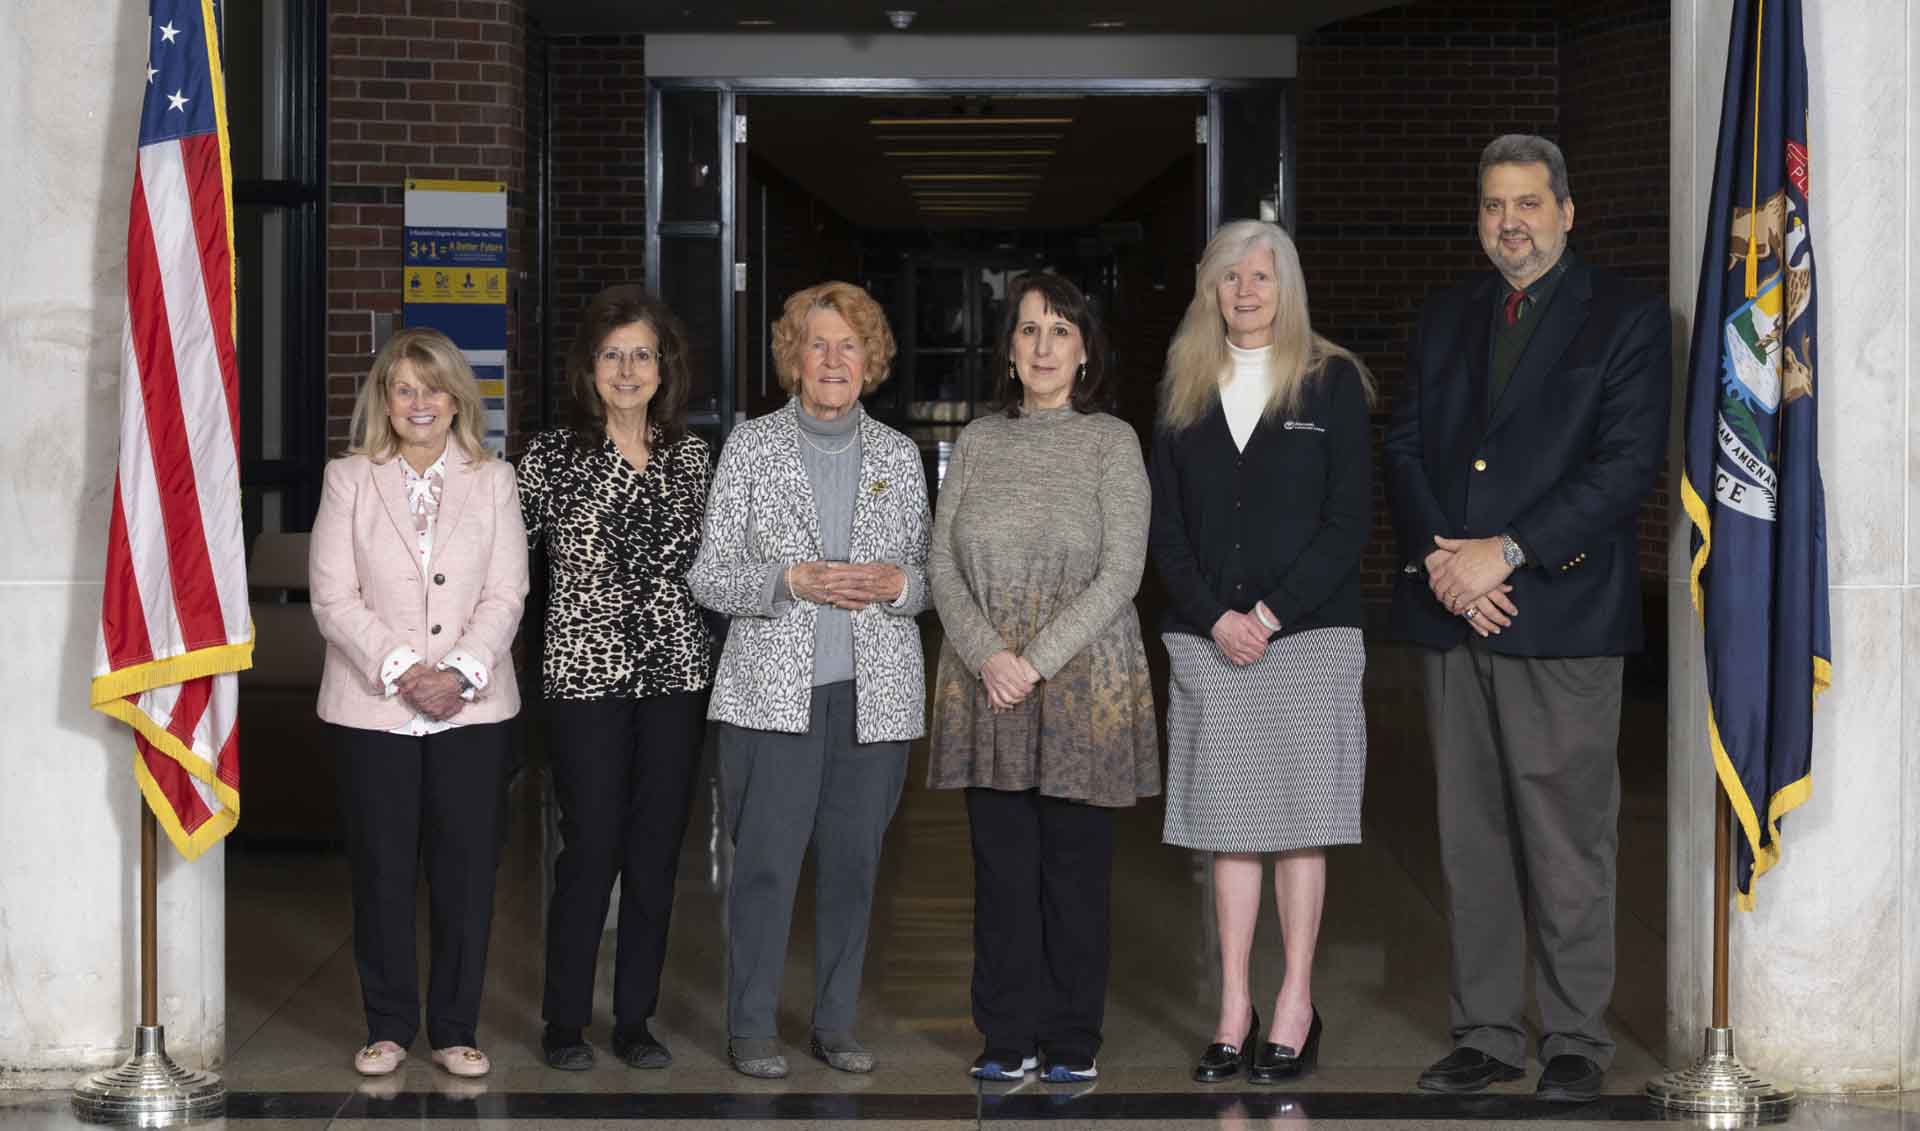 Macomb Community College Board of Trustees, from left: Katherine Bracey Lorenzo, chair; Roseanne DiMaria, treasurer; Joan Flynn, trustee; Shelley Vitale, trustee; Kristi Dean, secretary; and Frank Cusumano, vice chair. Trustee Vincent Viviano is not pictured.